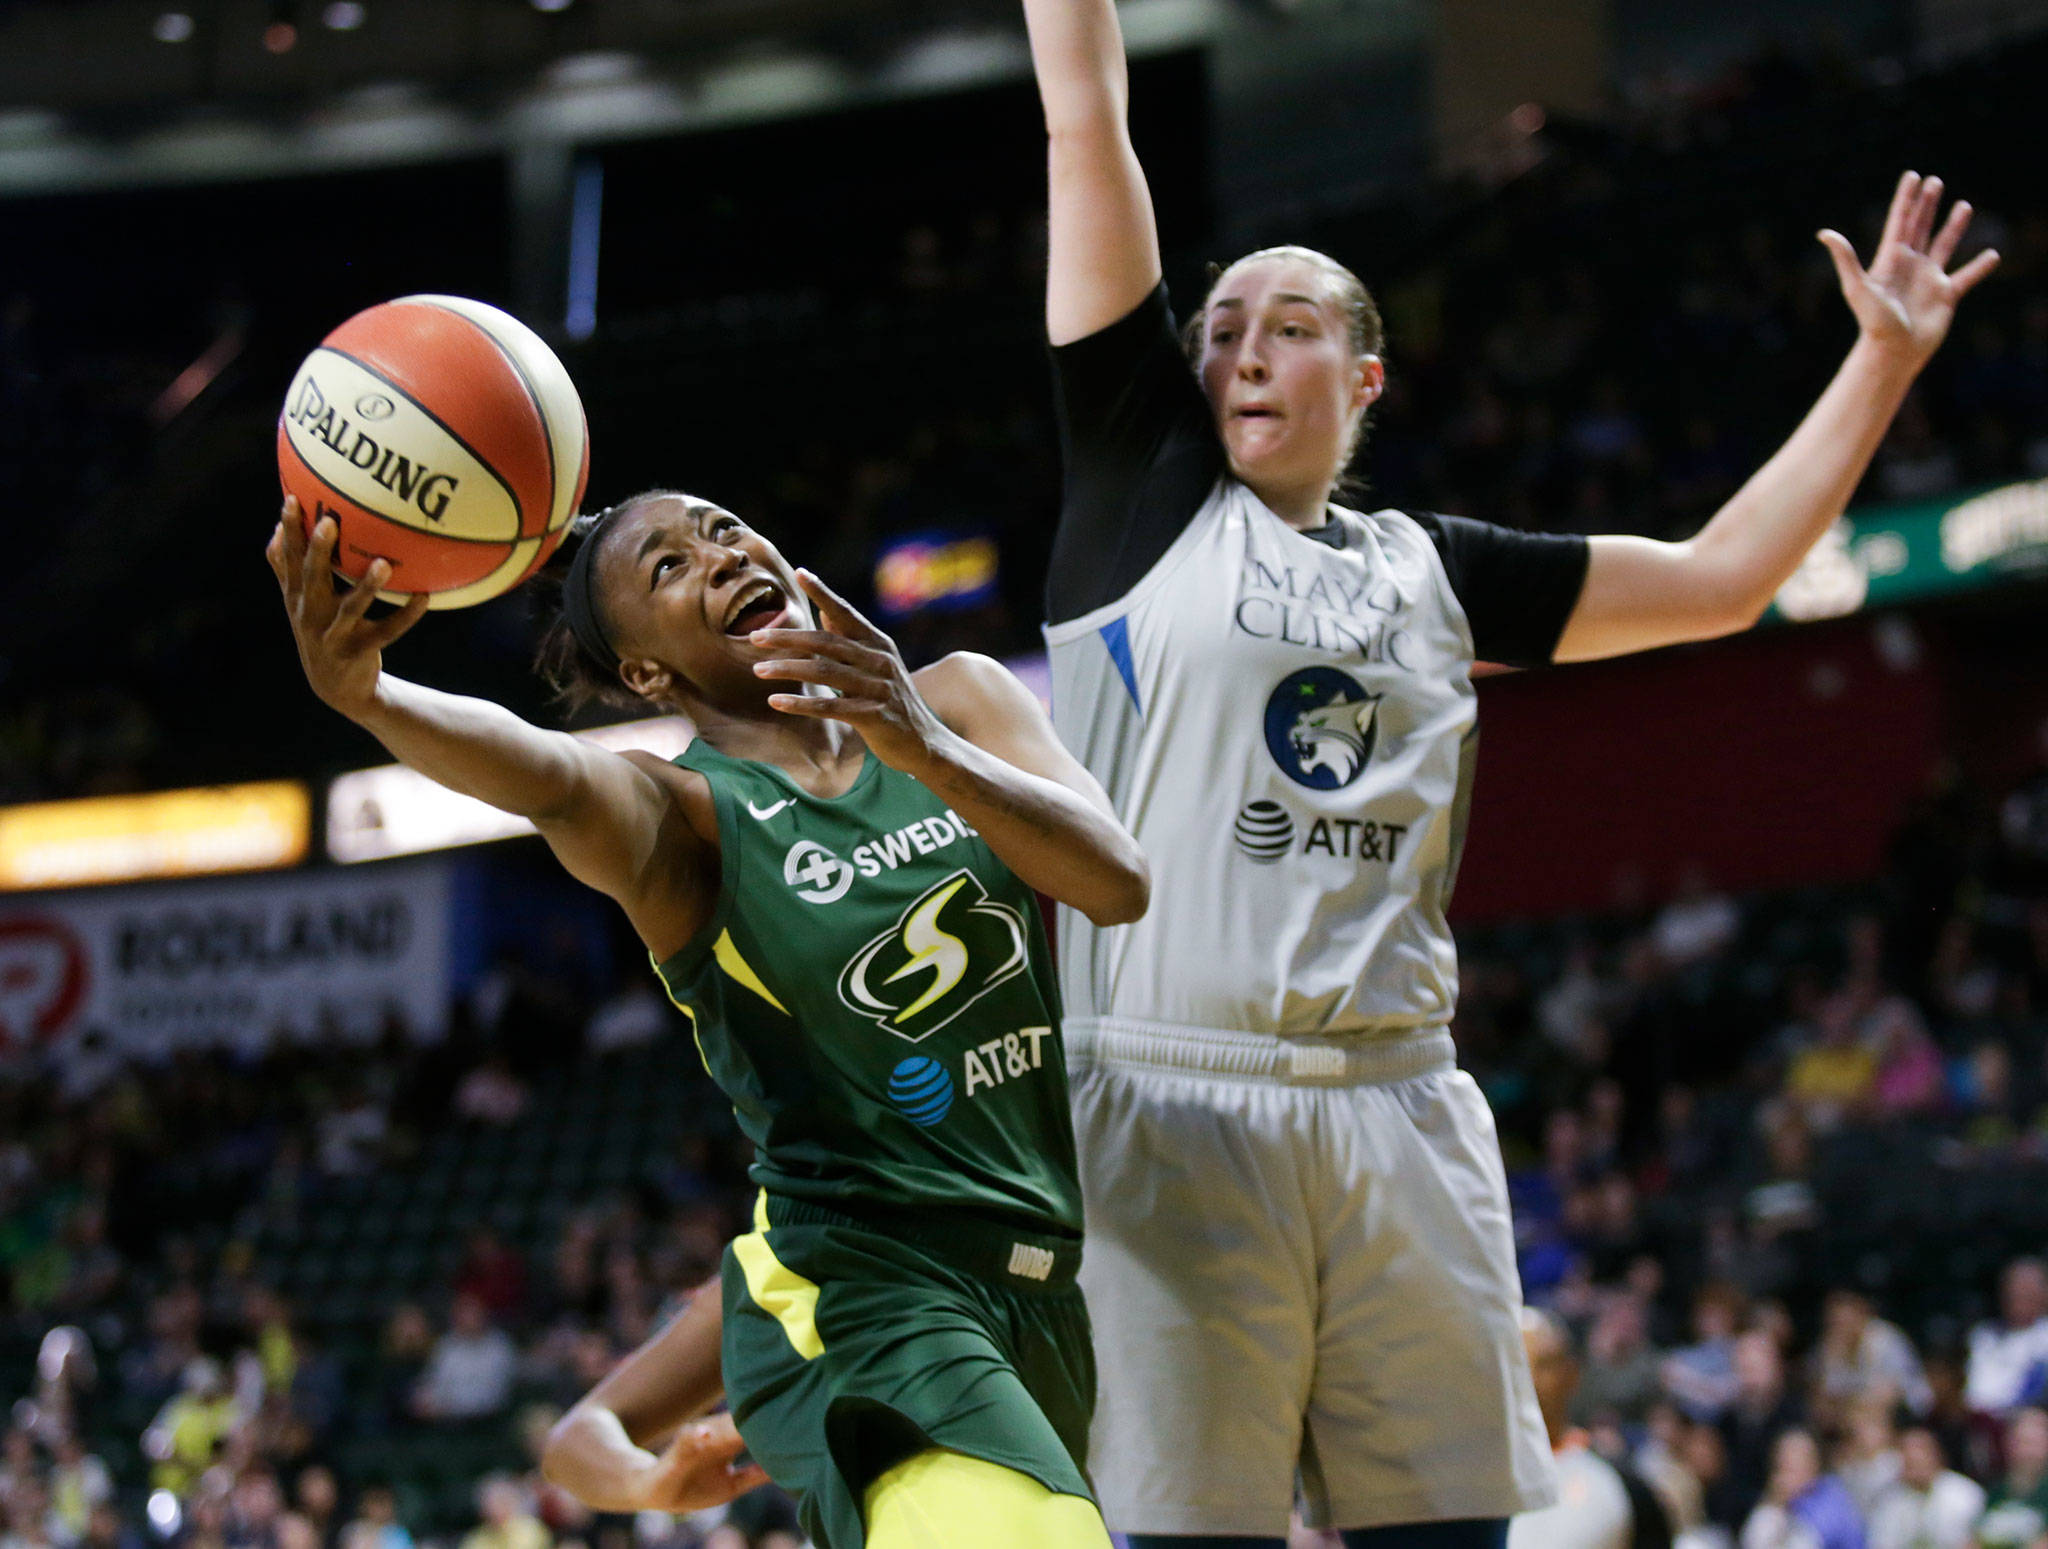 The Storm’s Jewell Loyd shoots as the Lynx’s Jessica Shepard defends during a game on June 4 at the Angel of the Winds Arena in Everett. (Andy Bronson / The Herald)